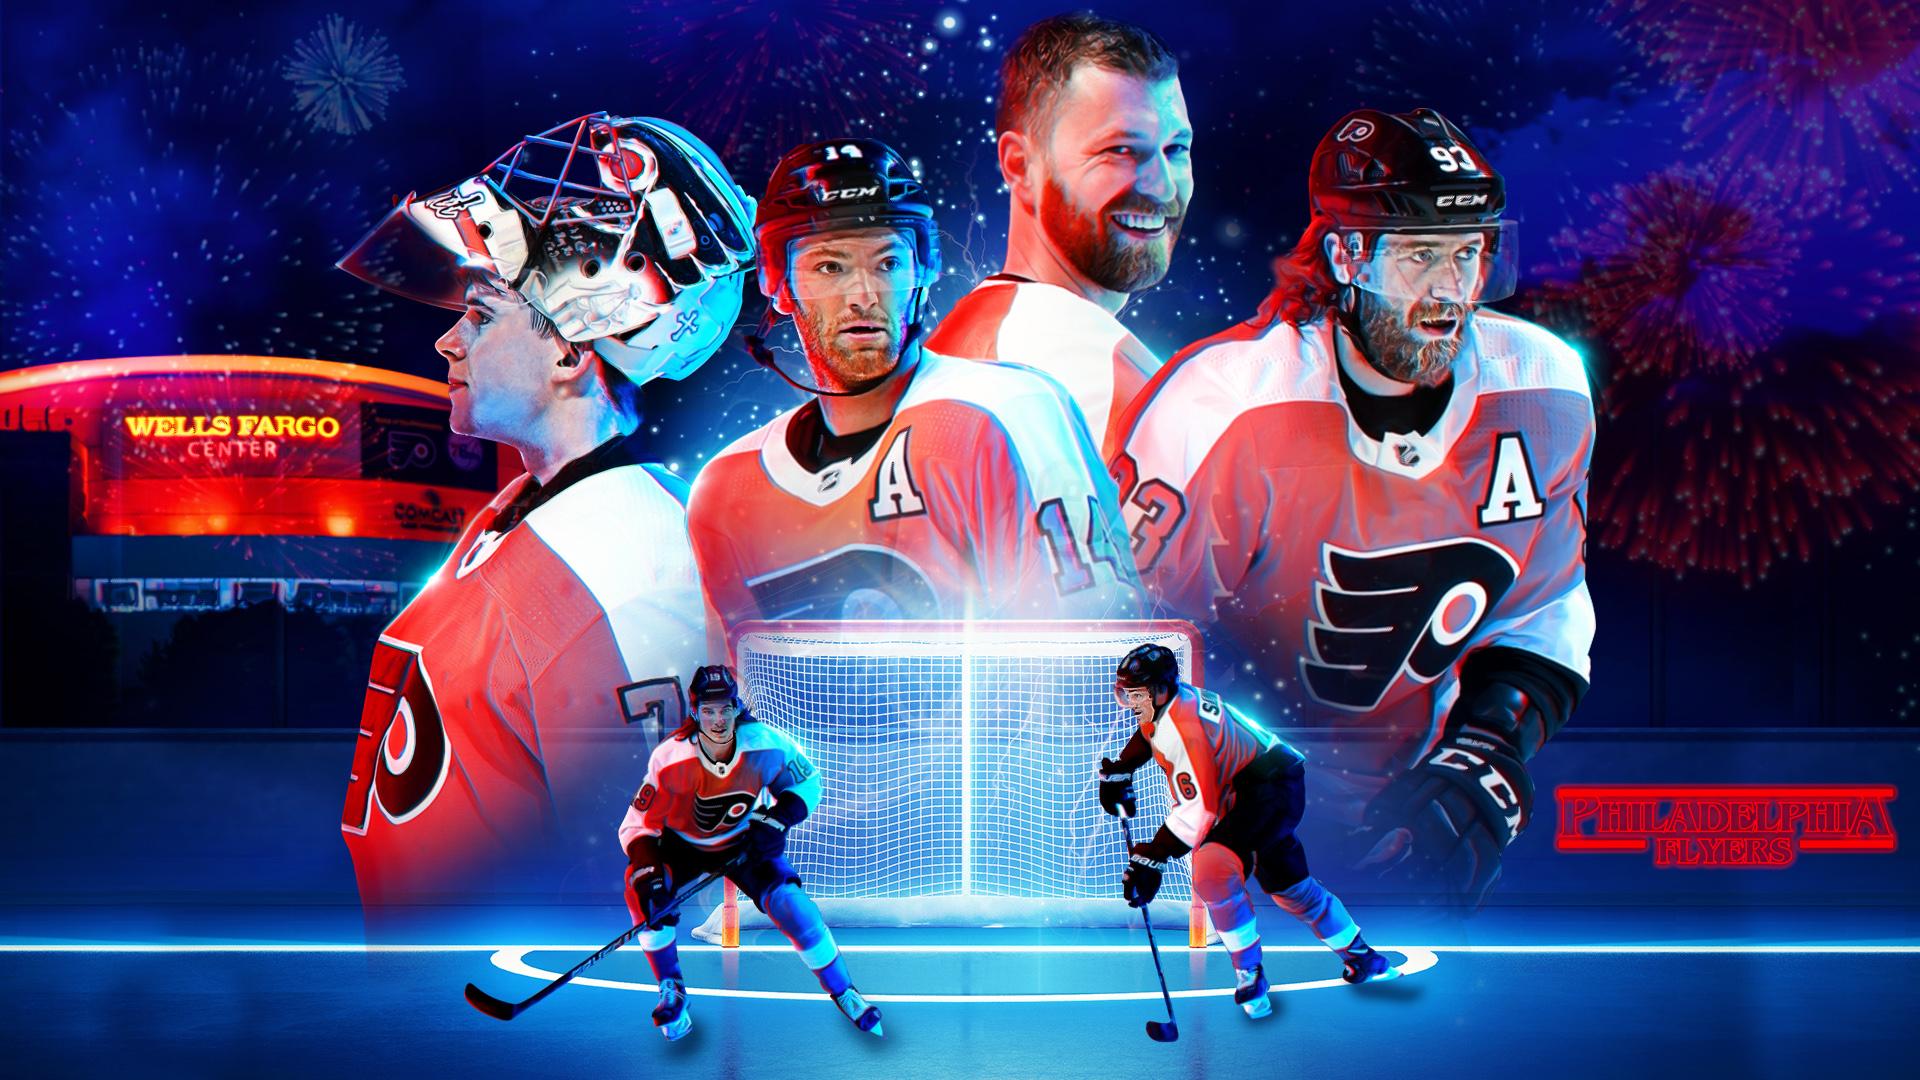 NHL 20 Wallpapers - Wallpaper Cave